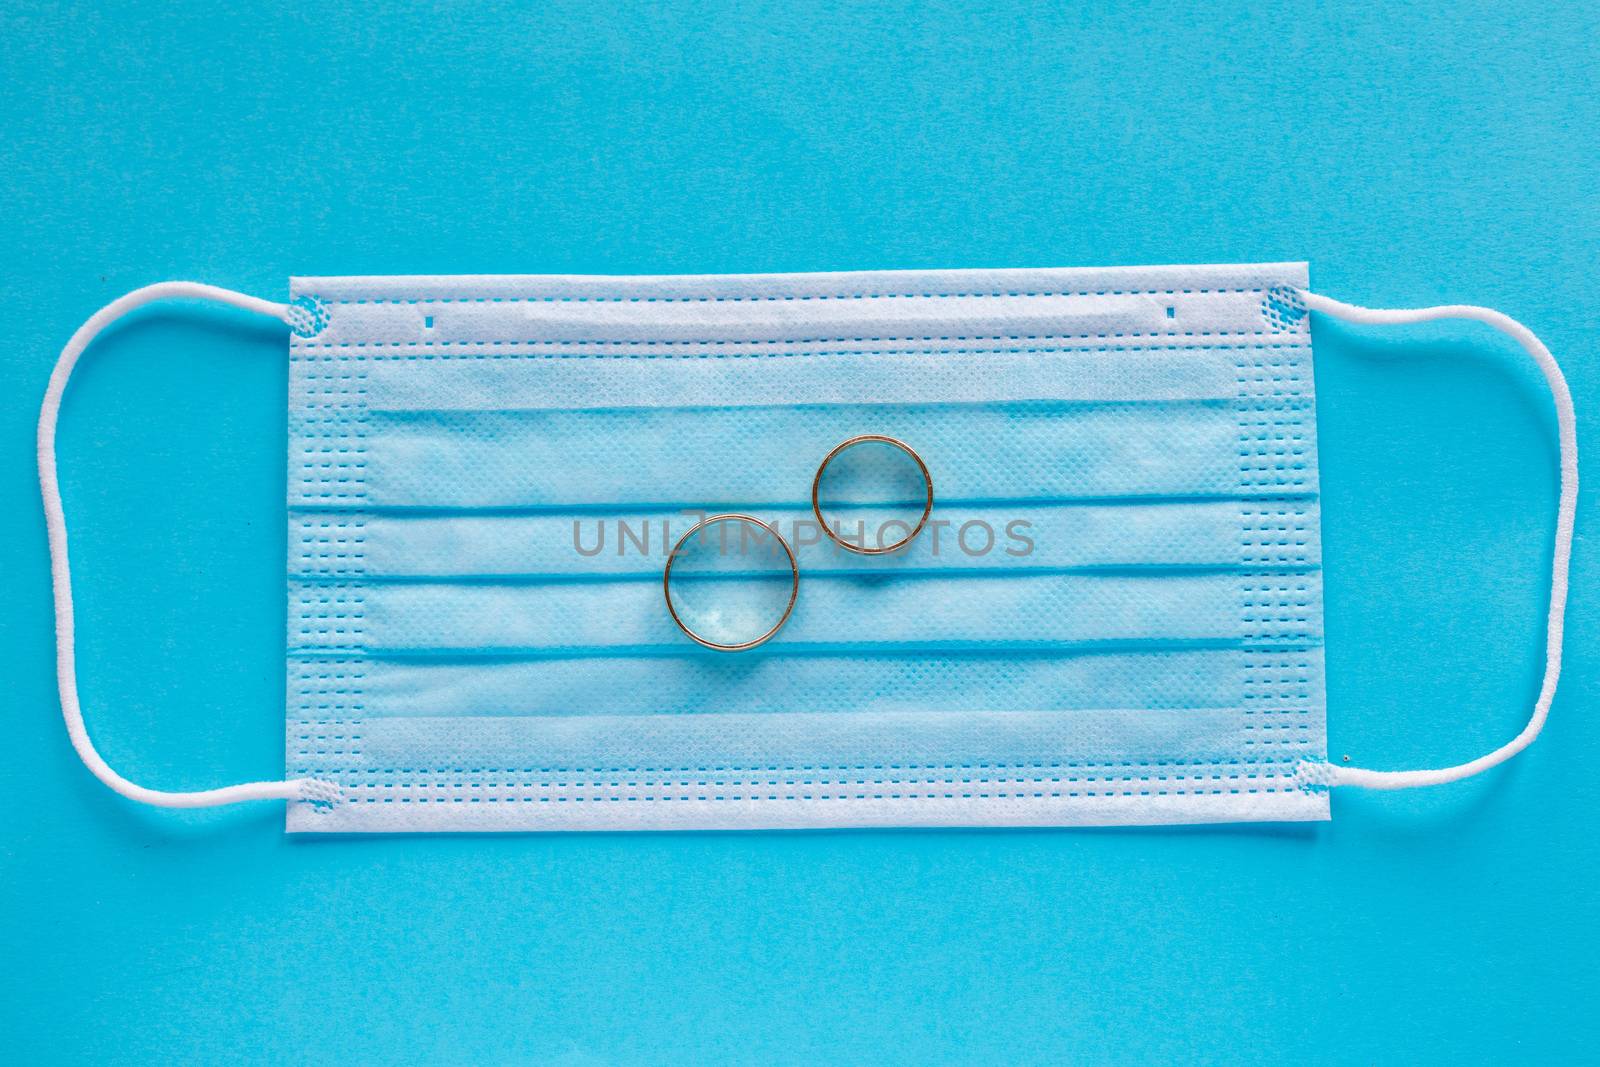 Wedding rings with surgical mask facemask - weddings and divorce concept in covid-19 pandemic time